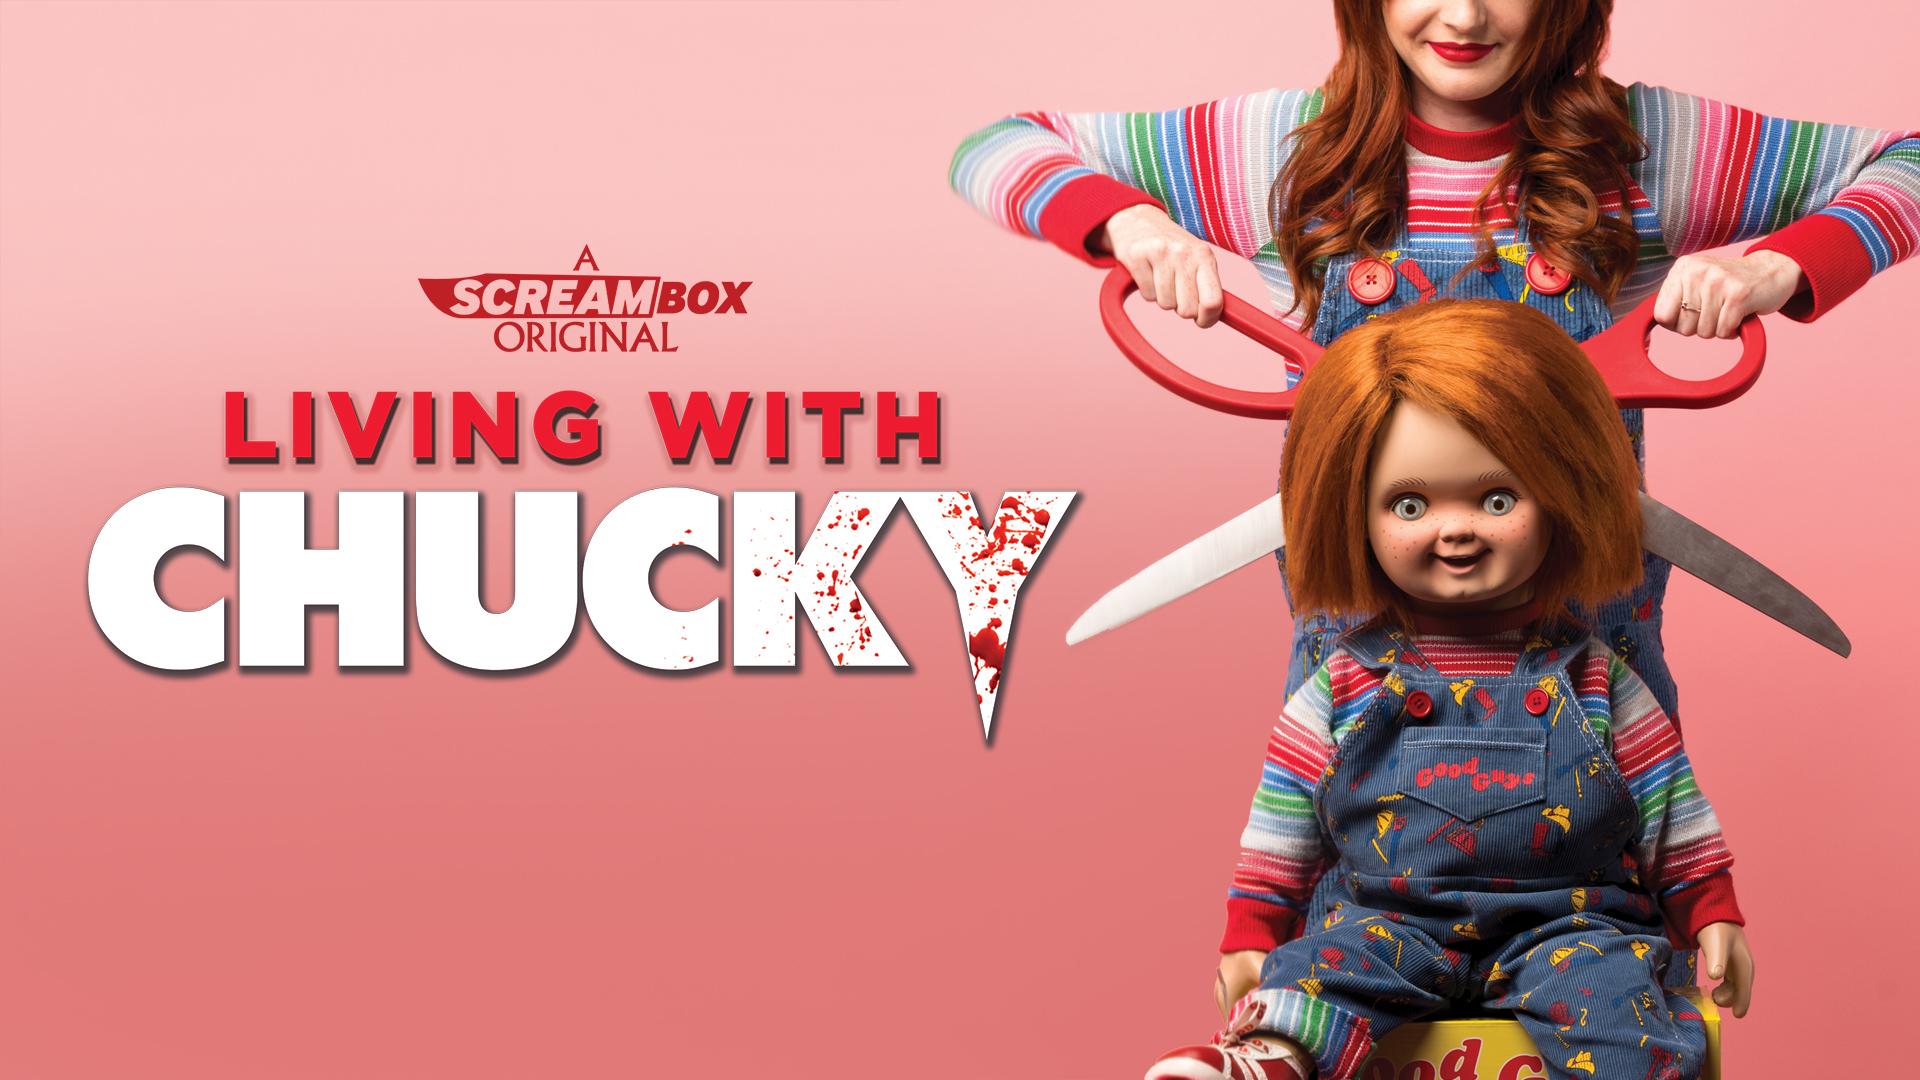 Living With Chucky Screambox